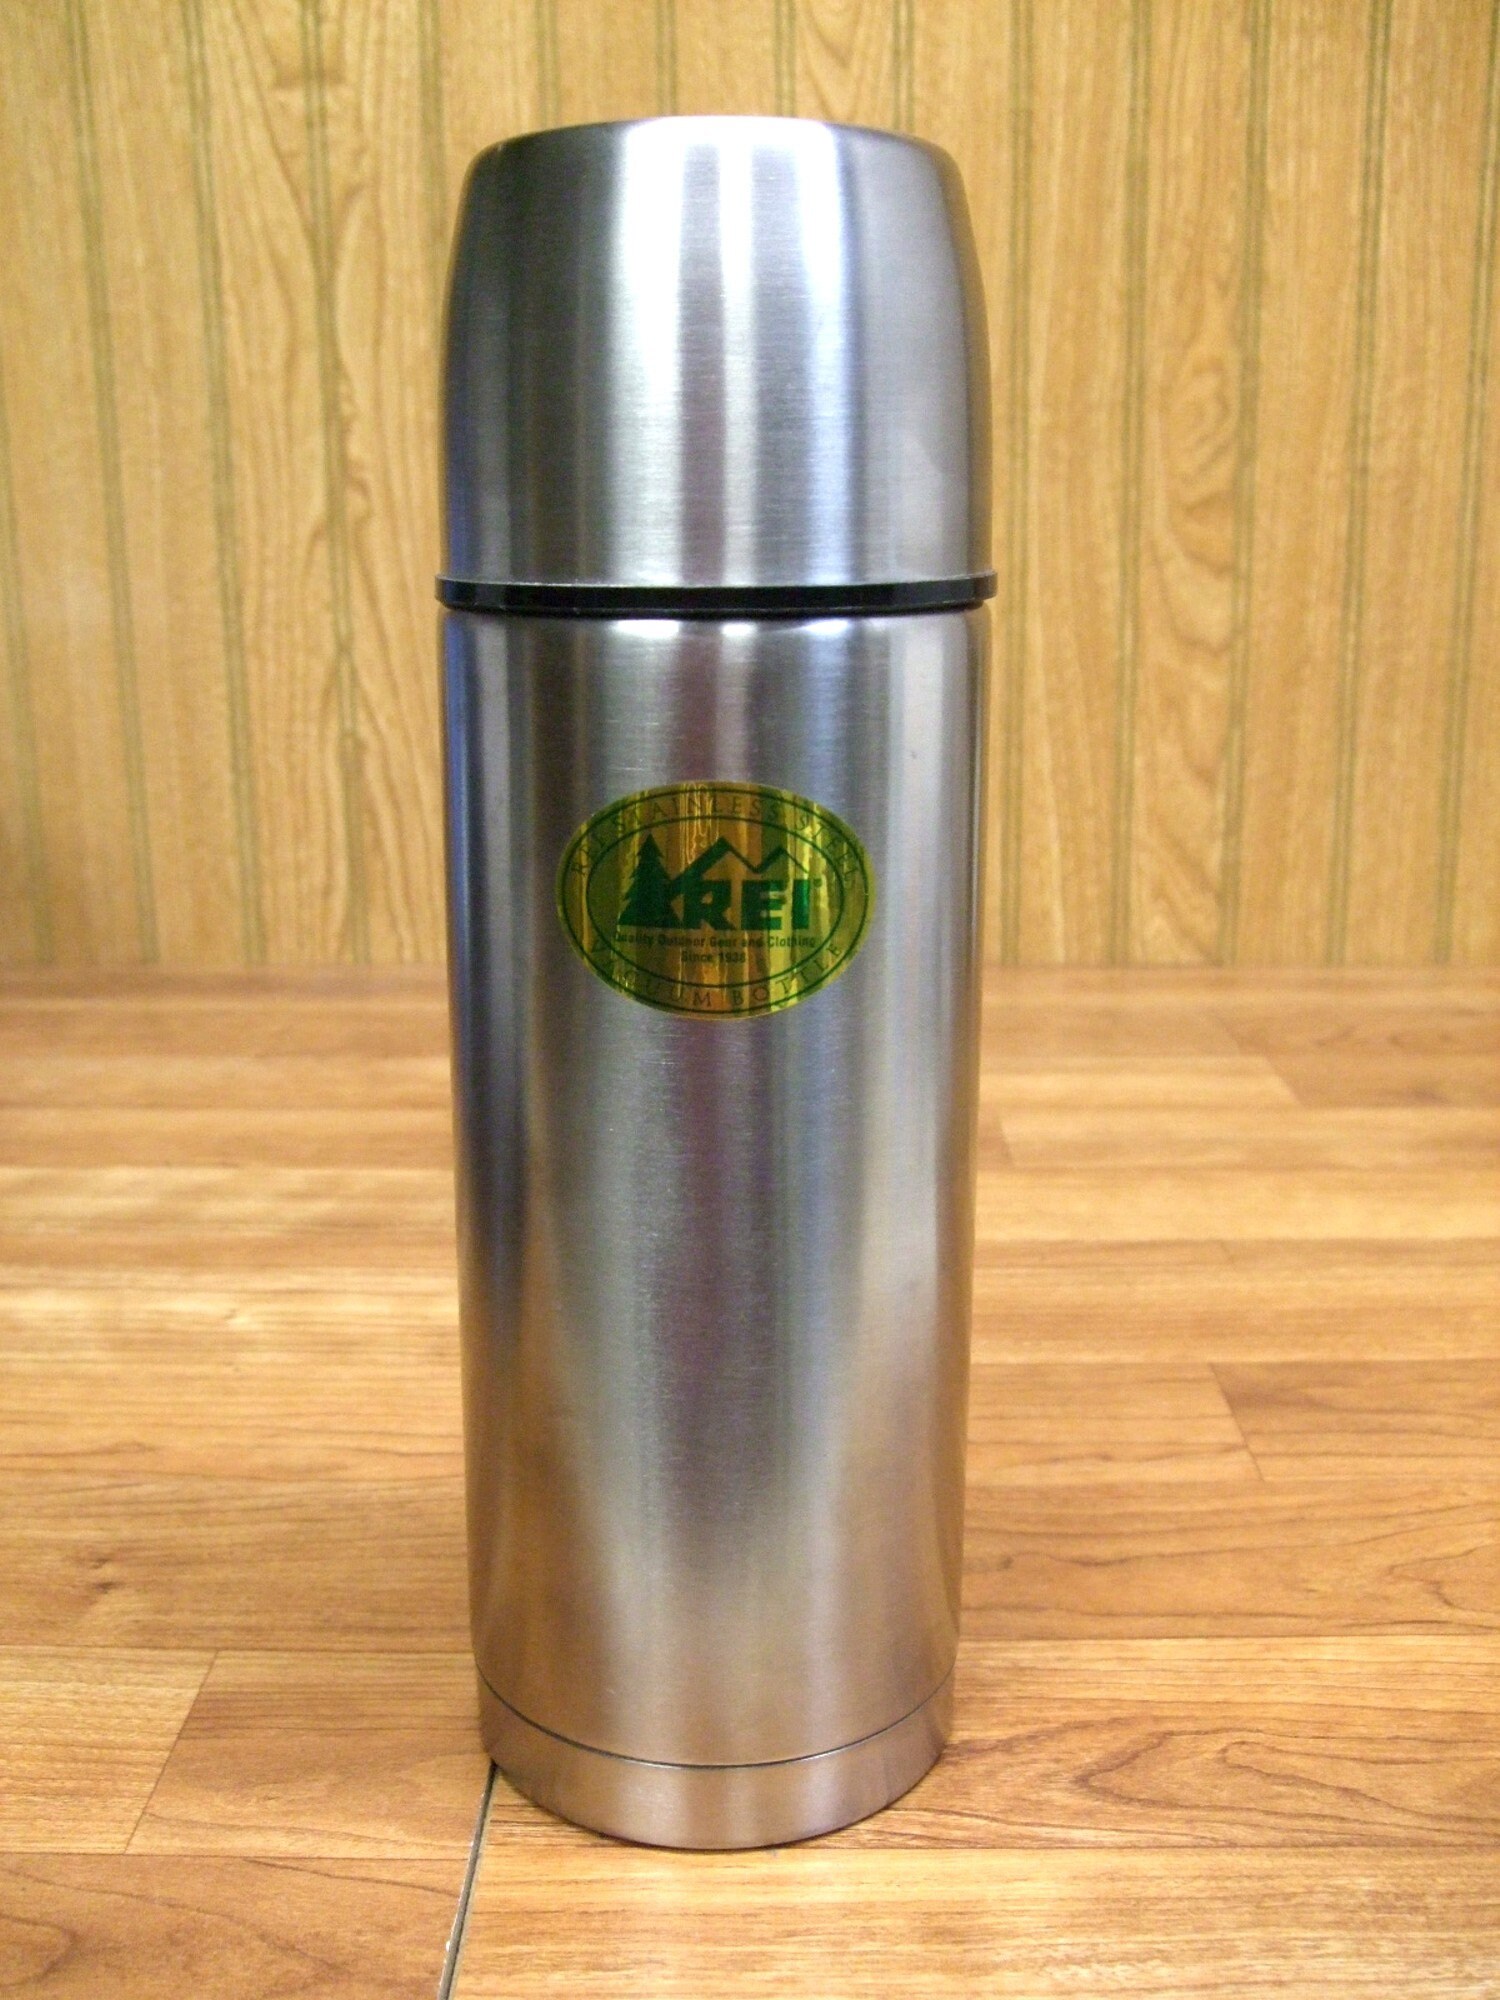 Thermos glass vacuum lacquered metal thermal carafe hot & cold tea